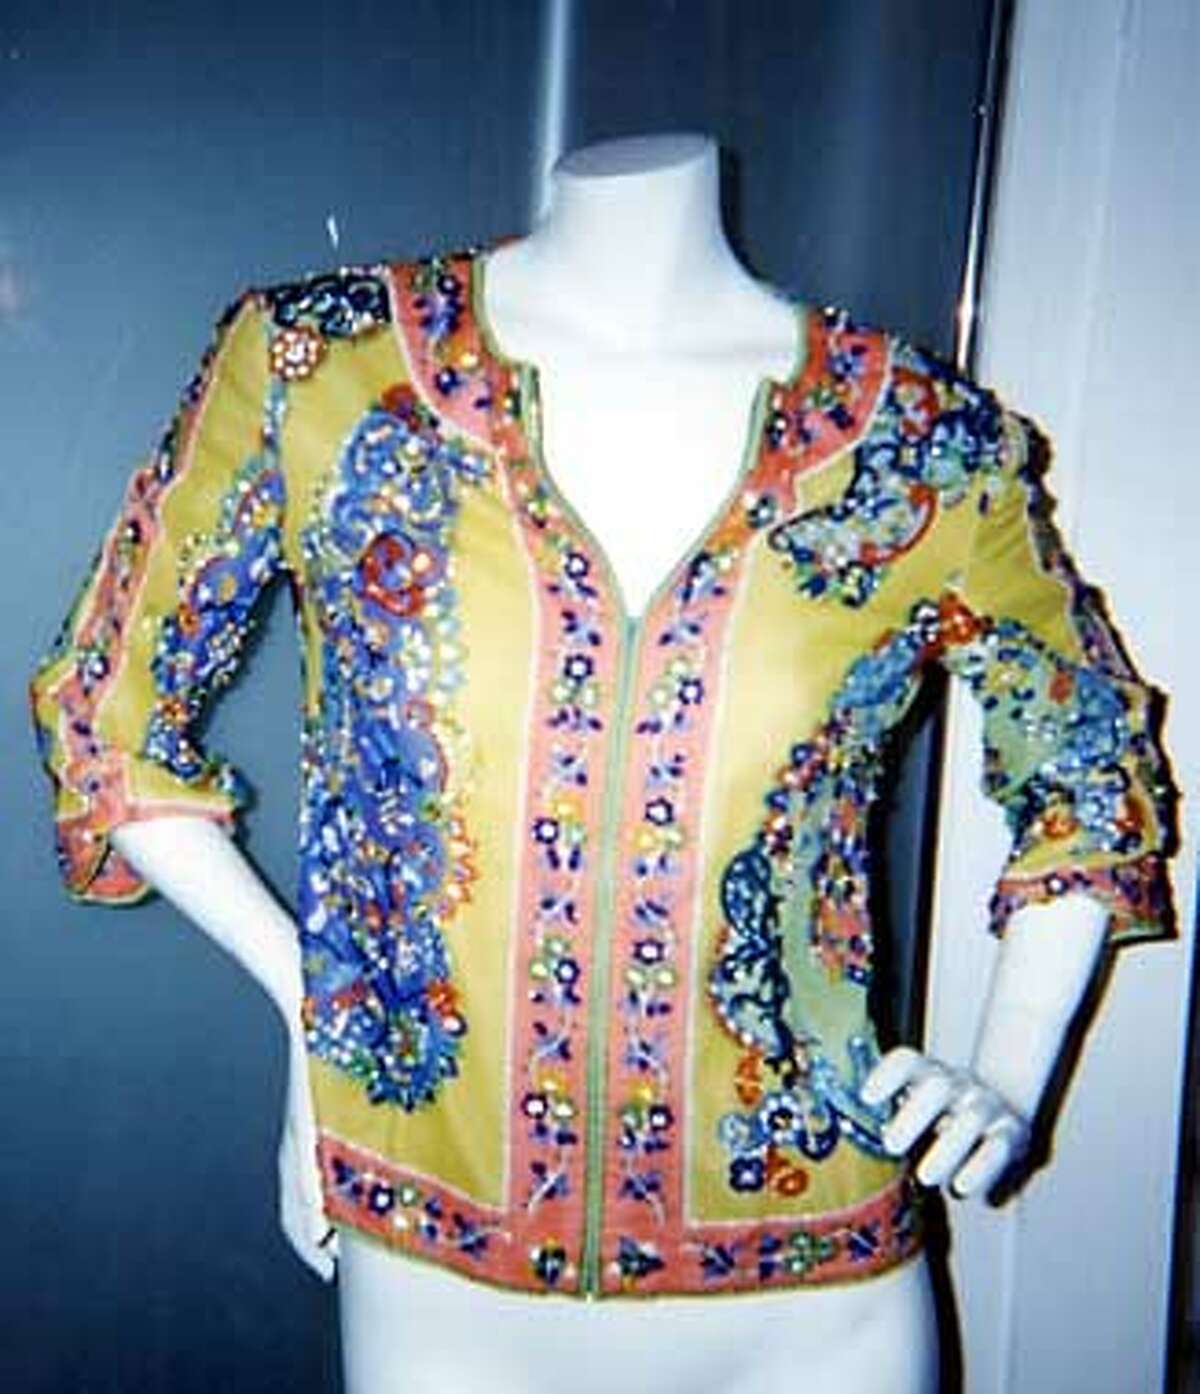 THE PRINTS OF PUCCI / Vintage clothing in designer's wild geometric ...